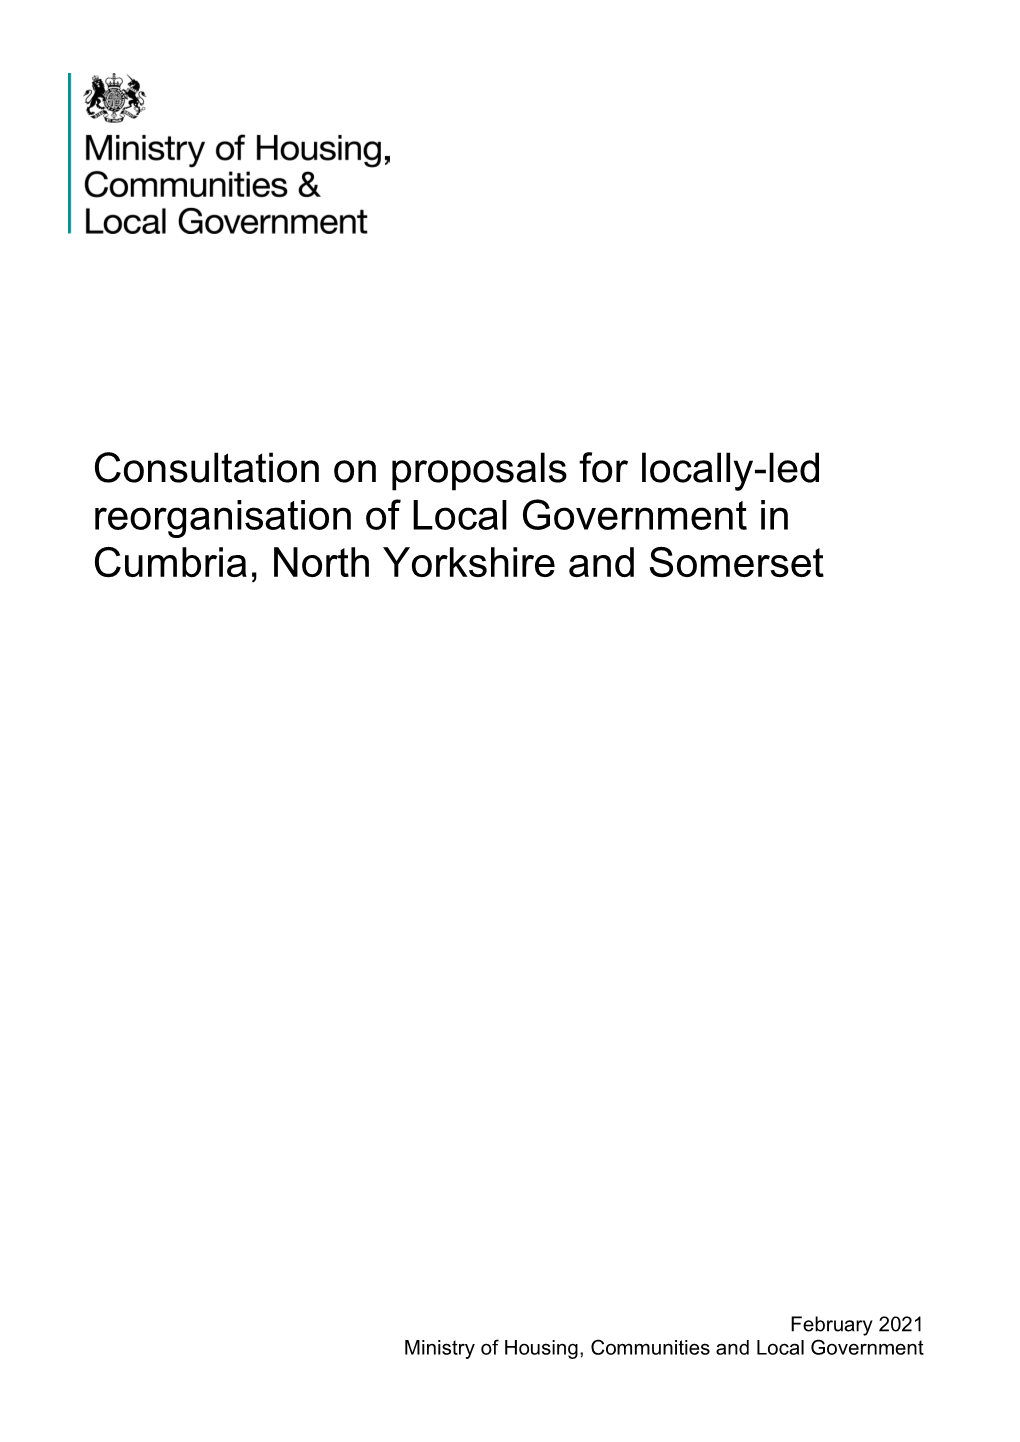 Consultation on Proposals for Locally-Led Reorganisation of Local Government in Cumbria, North Yorkshire and Somerset